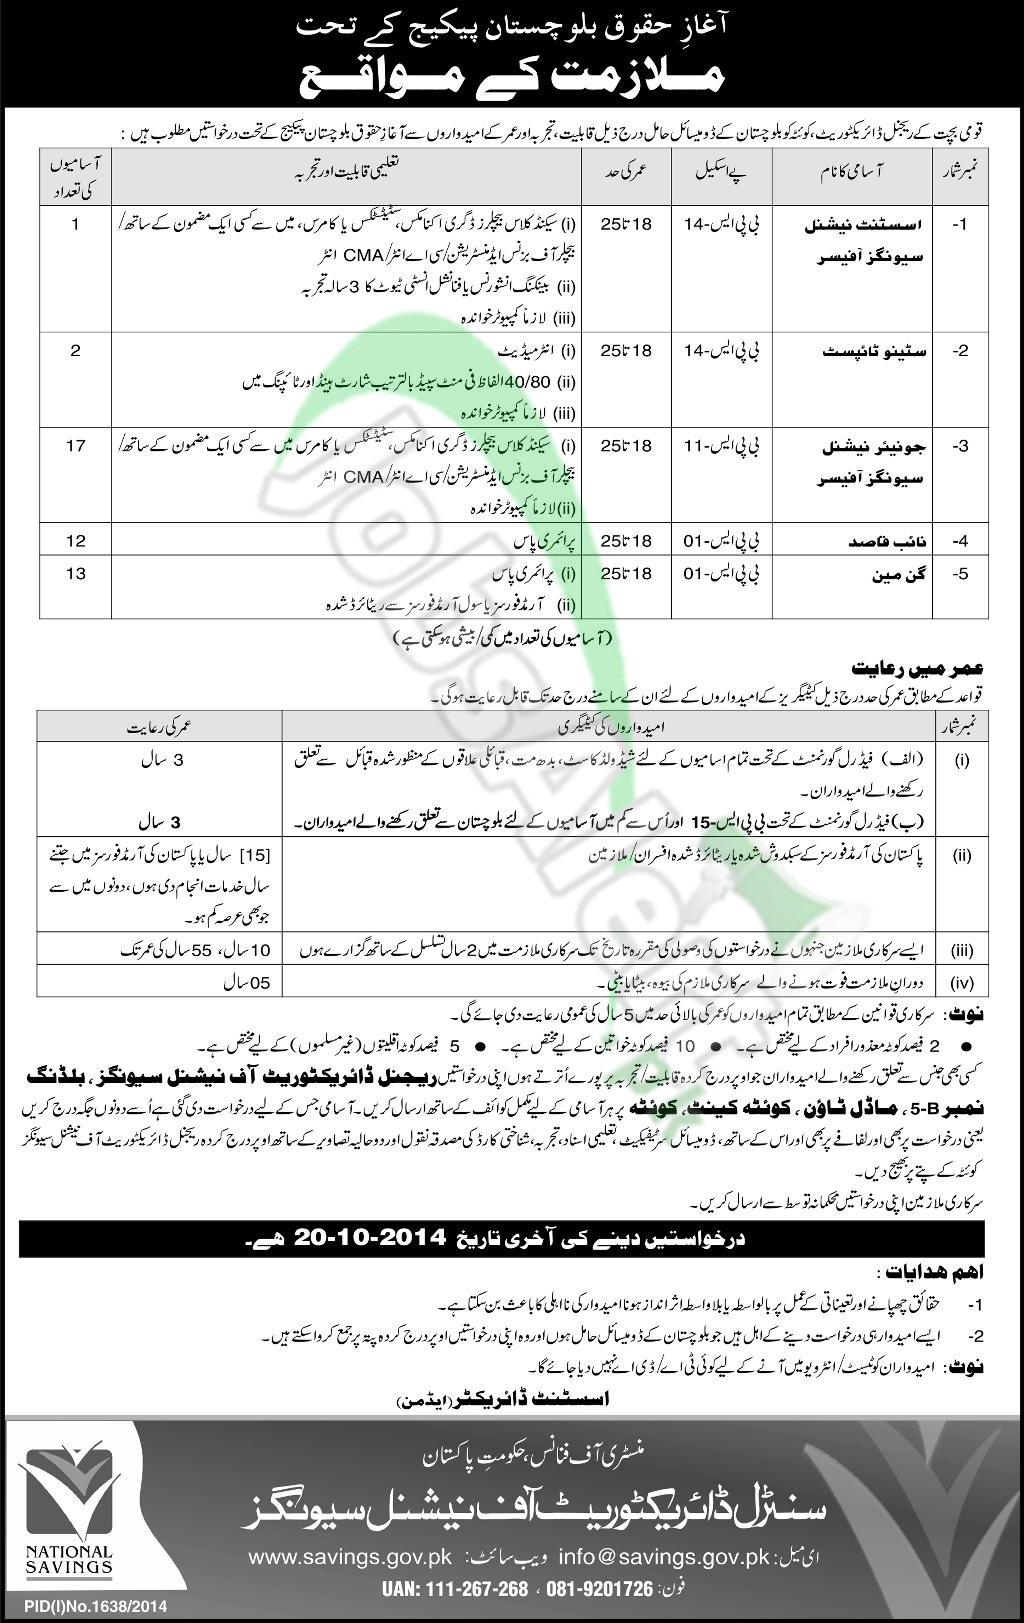 Central directorate of national savings jobs